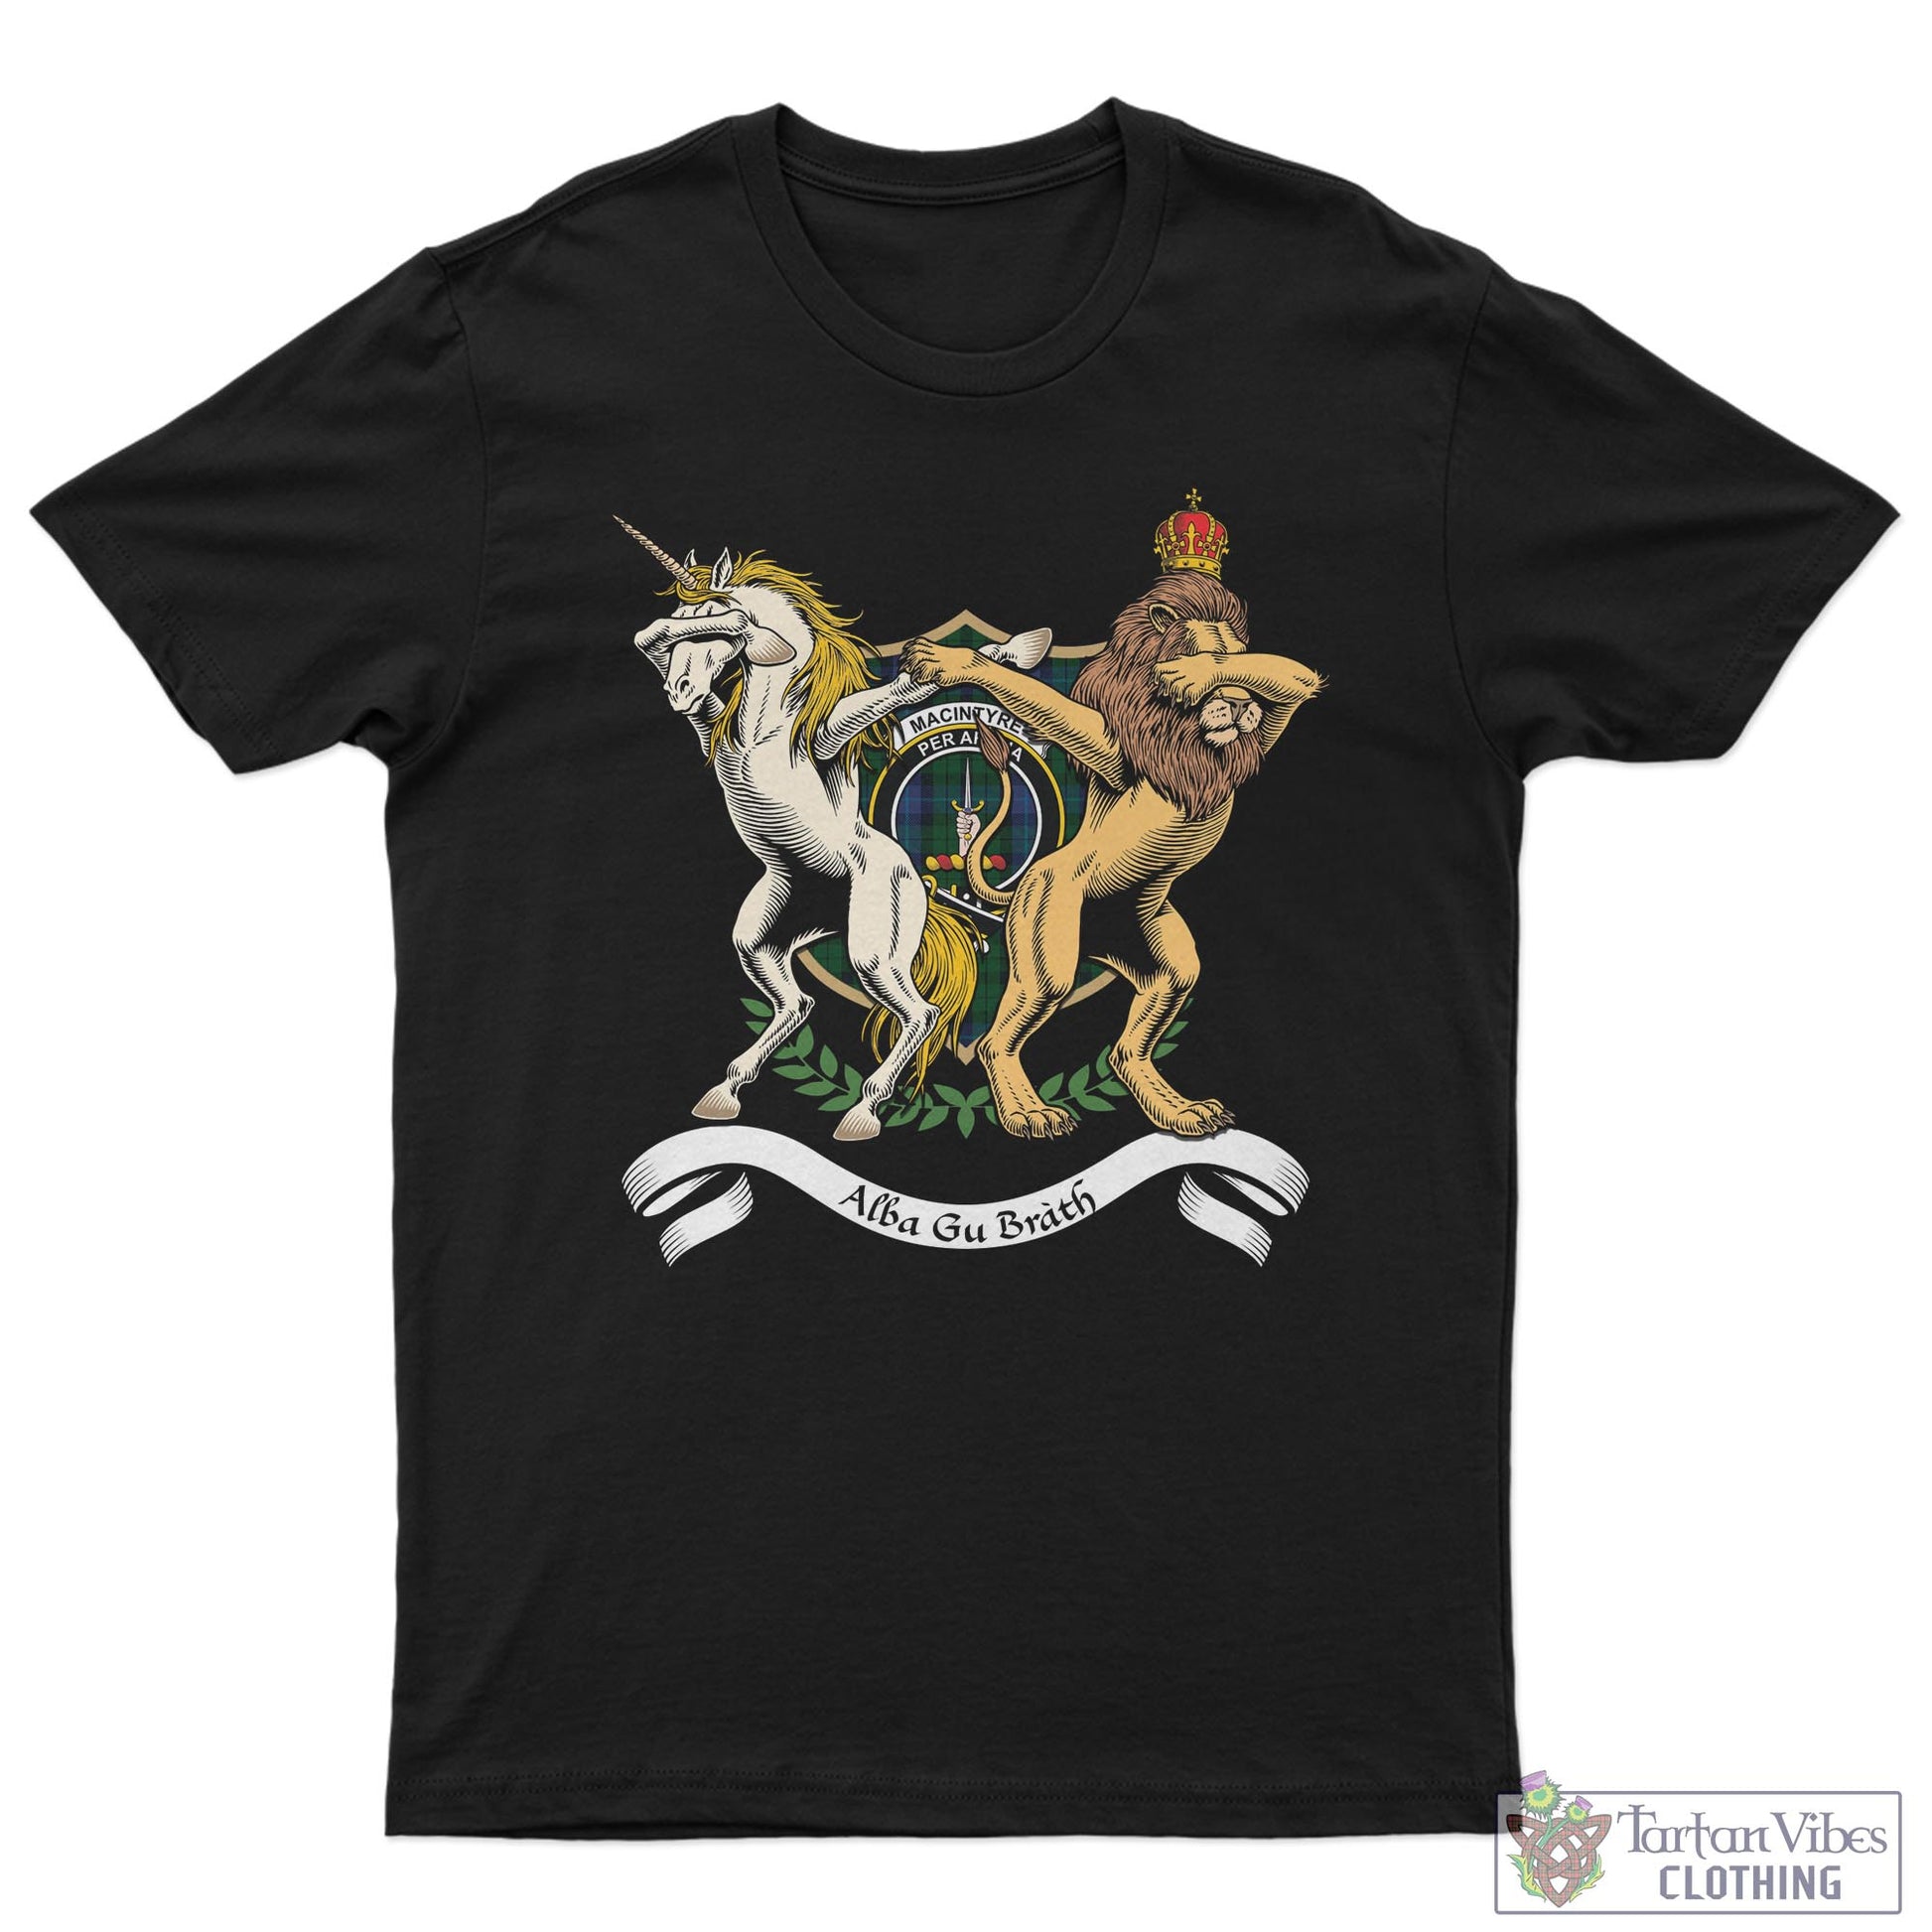 Tartan Vibes Clothing MacIntyre Family Crest Cotton Men's T-Shirt with Scotland Royal Coat Of Arm Funny Style